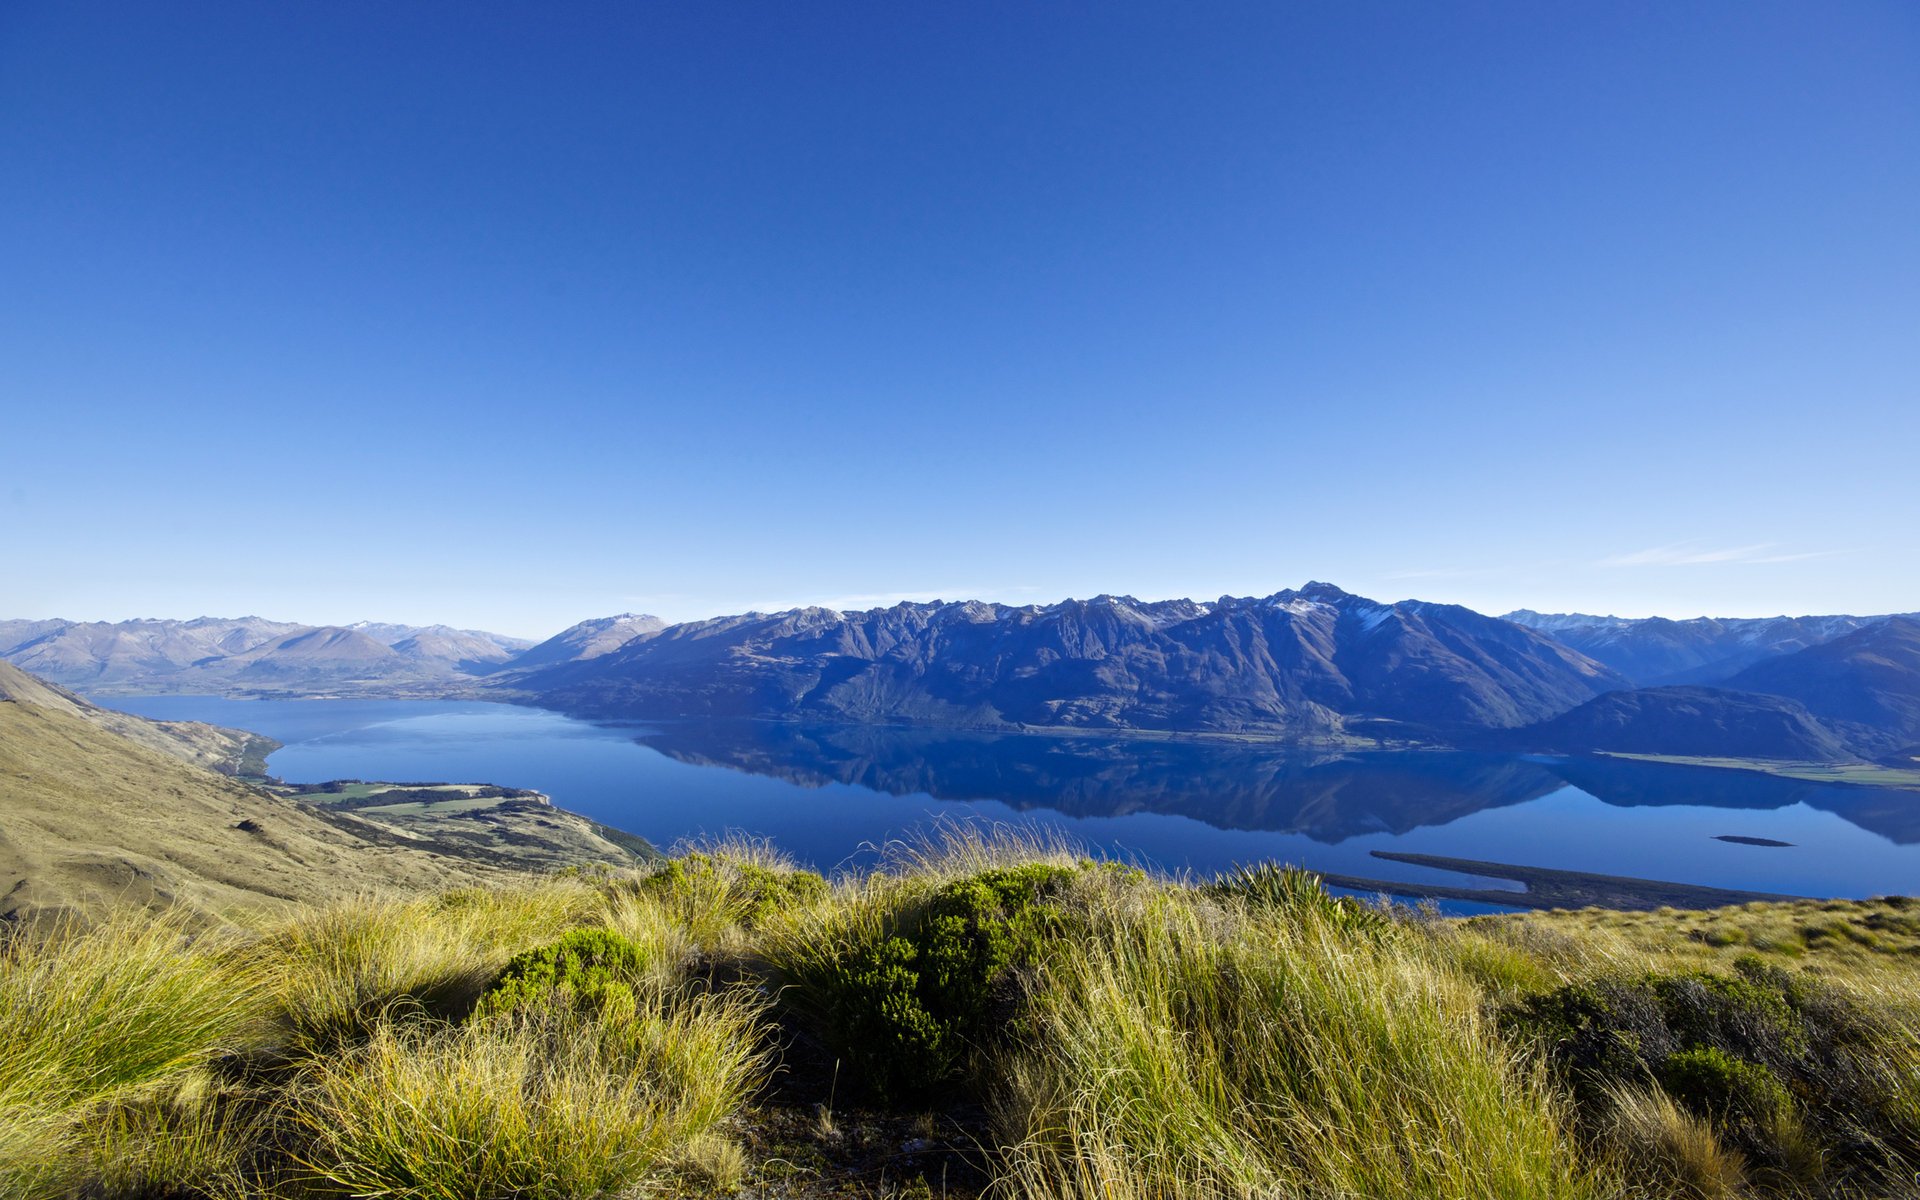 Lake and Mountains in New Zealand